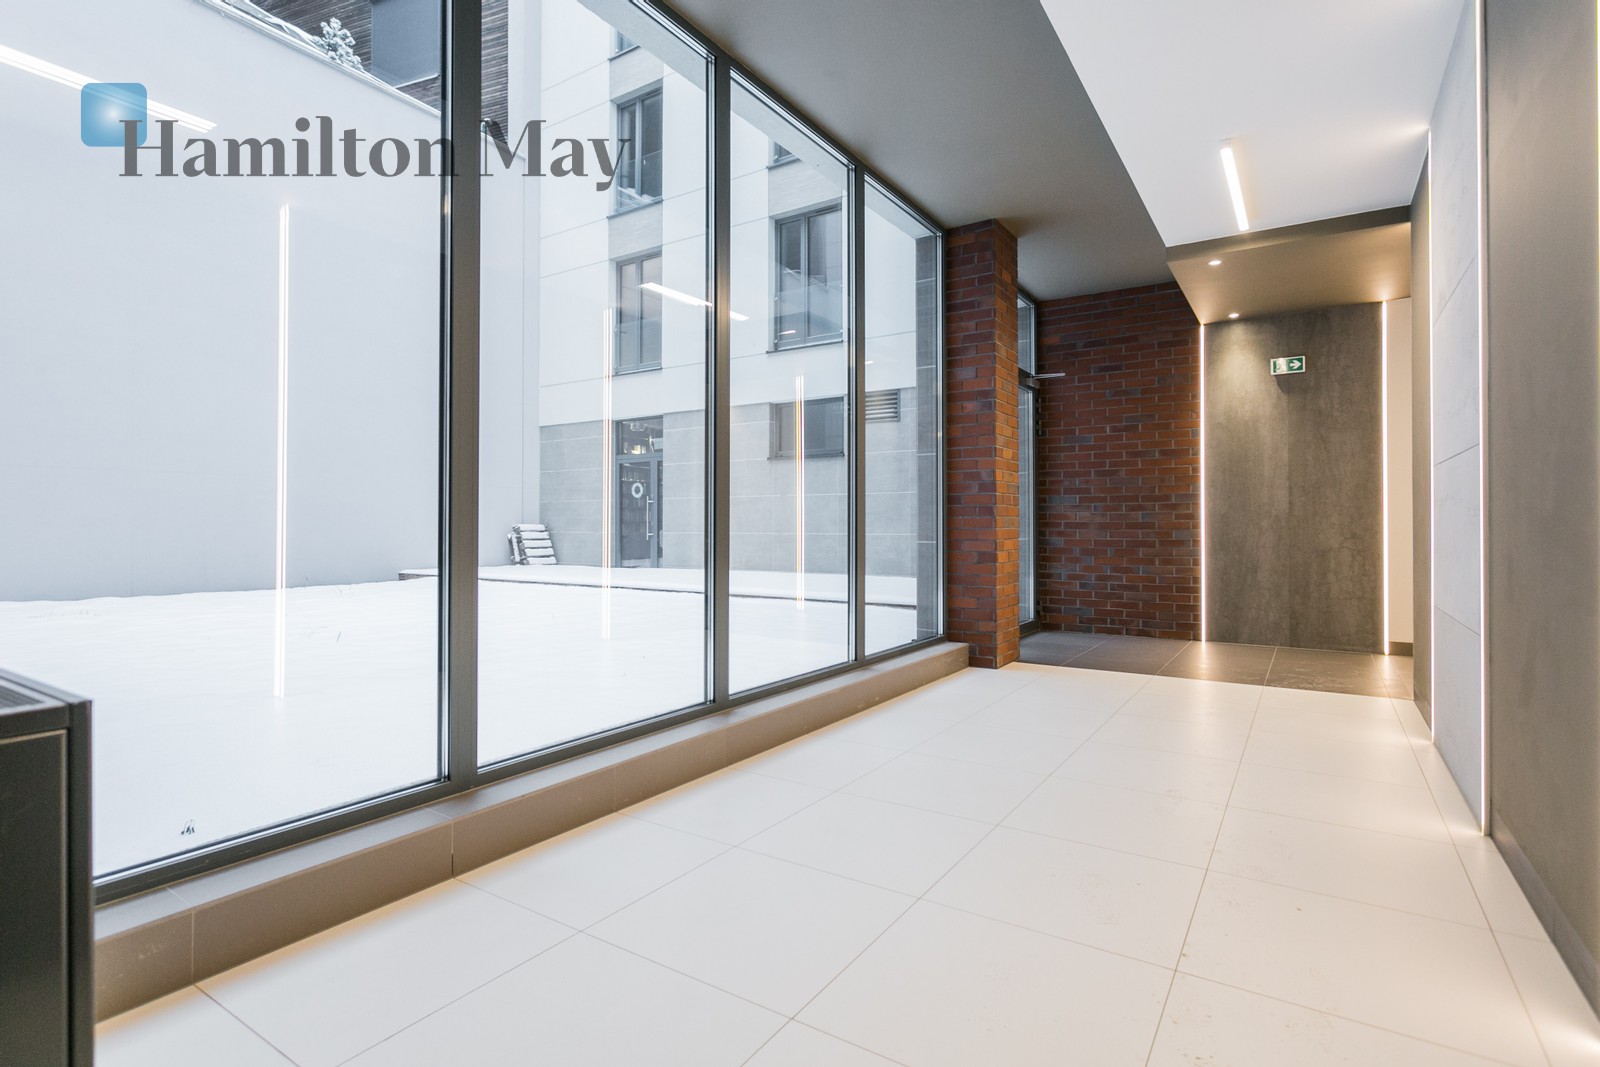 Level: 5 Status: existing Number of units: 27 Sale price from: 14000PLN Avg. sales price/m2: 14000PLN Rental price from: 3000PLN Avg. rental price/m2: 60PLN - slider